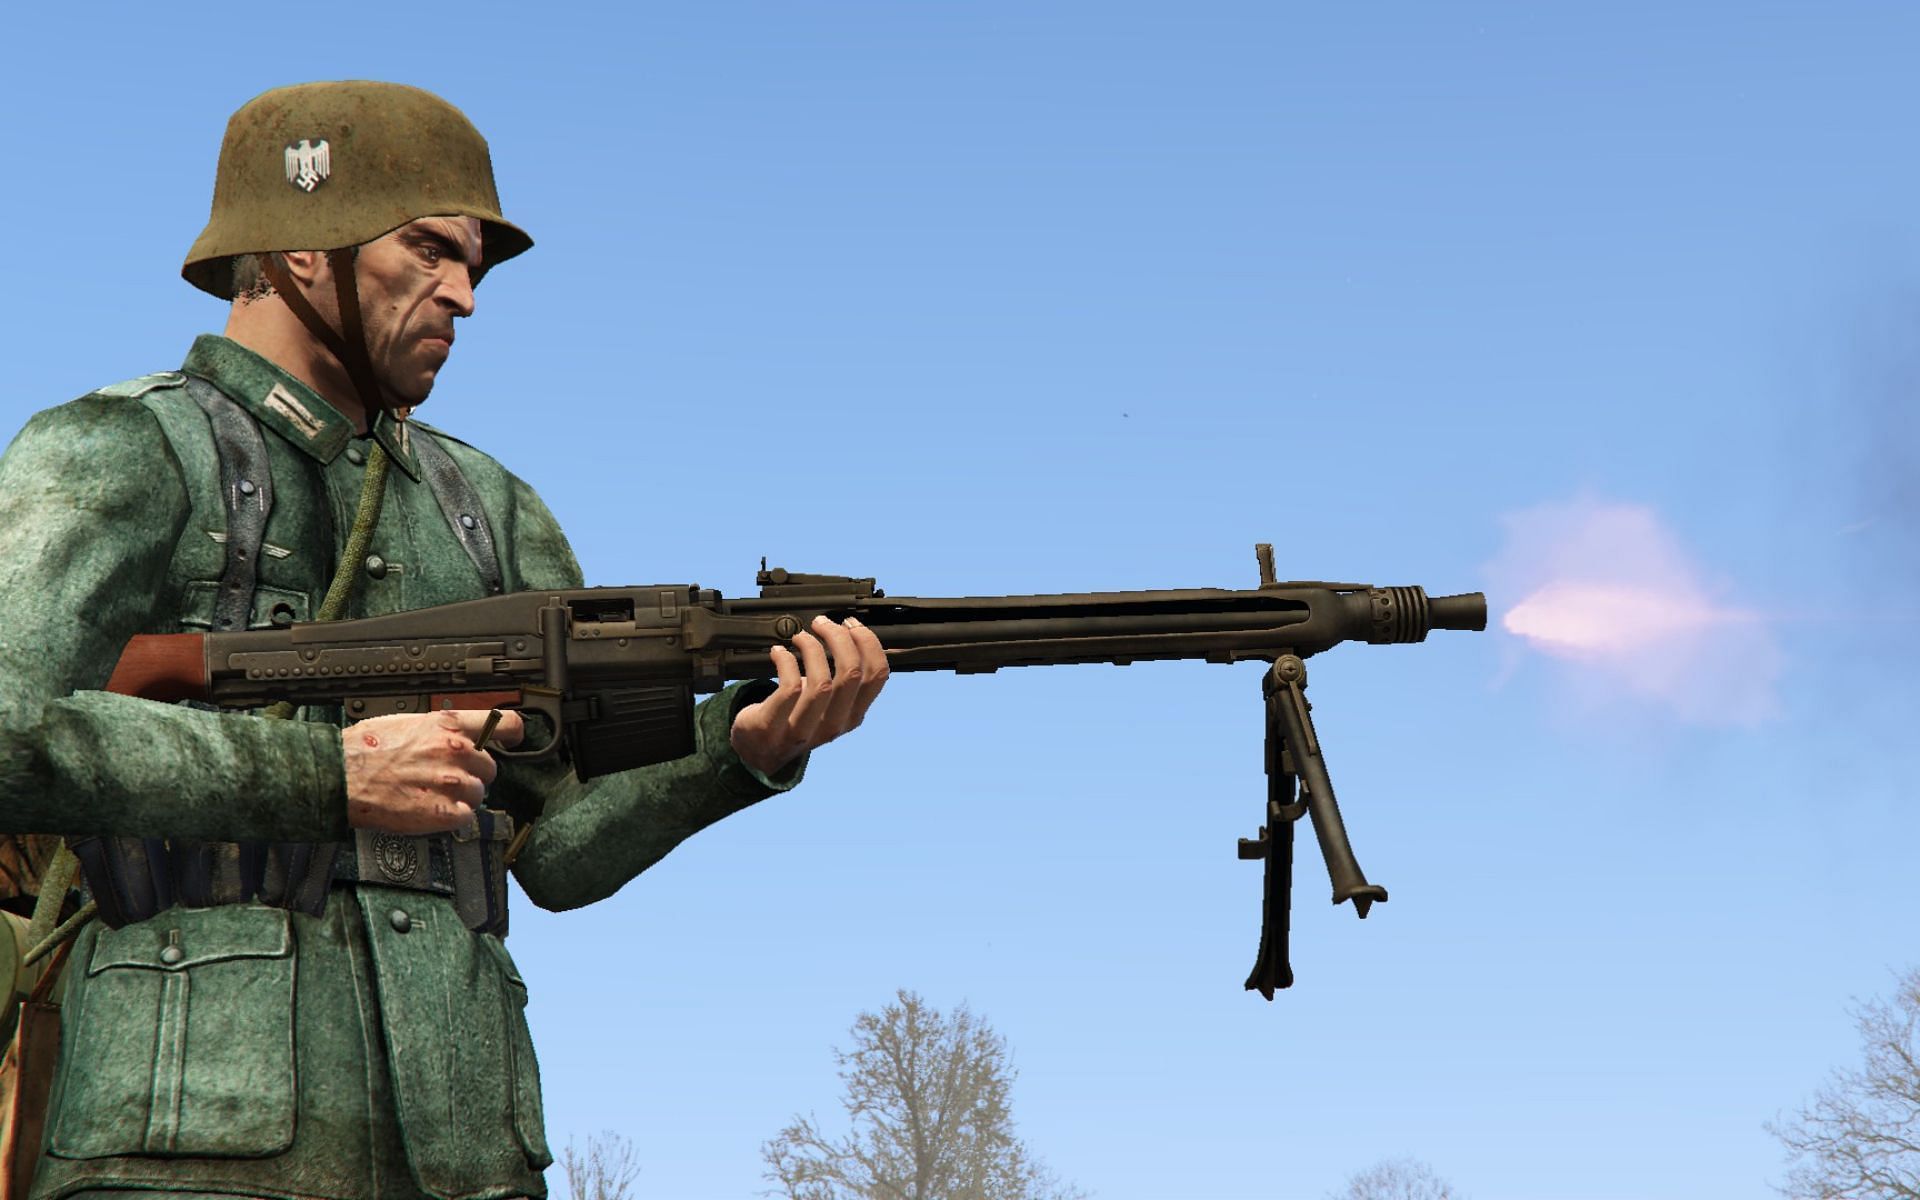 A highly-detailed MG-42 in-game (Image via metroidguy, GTA5-Mods)